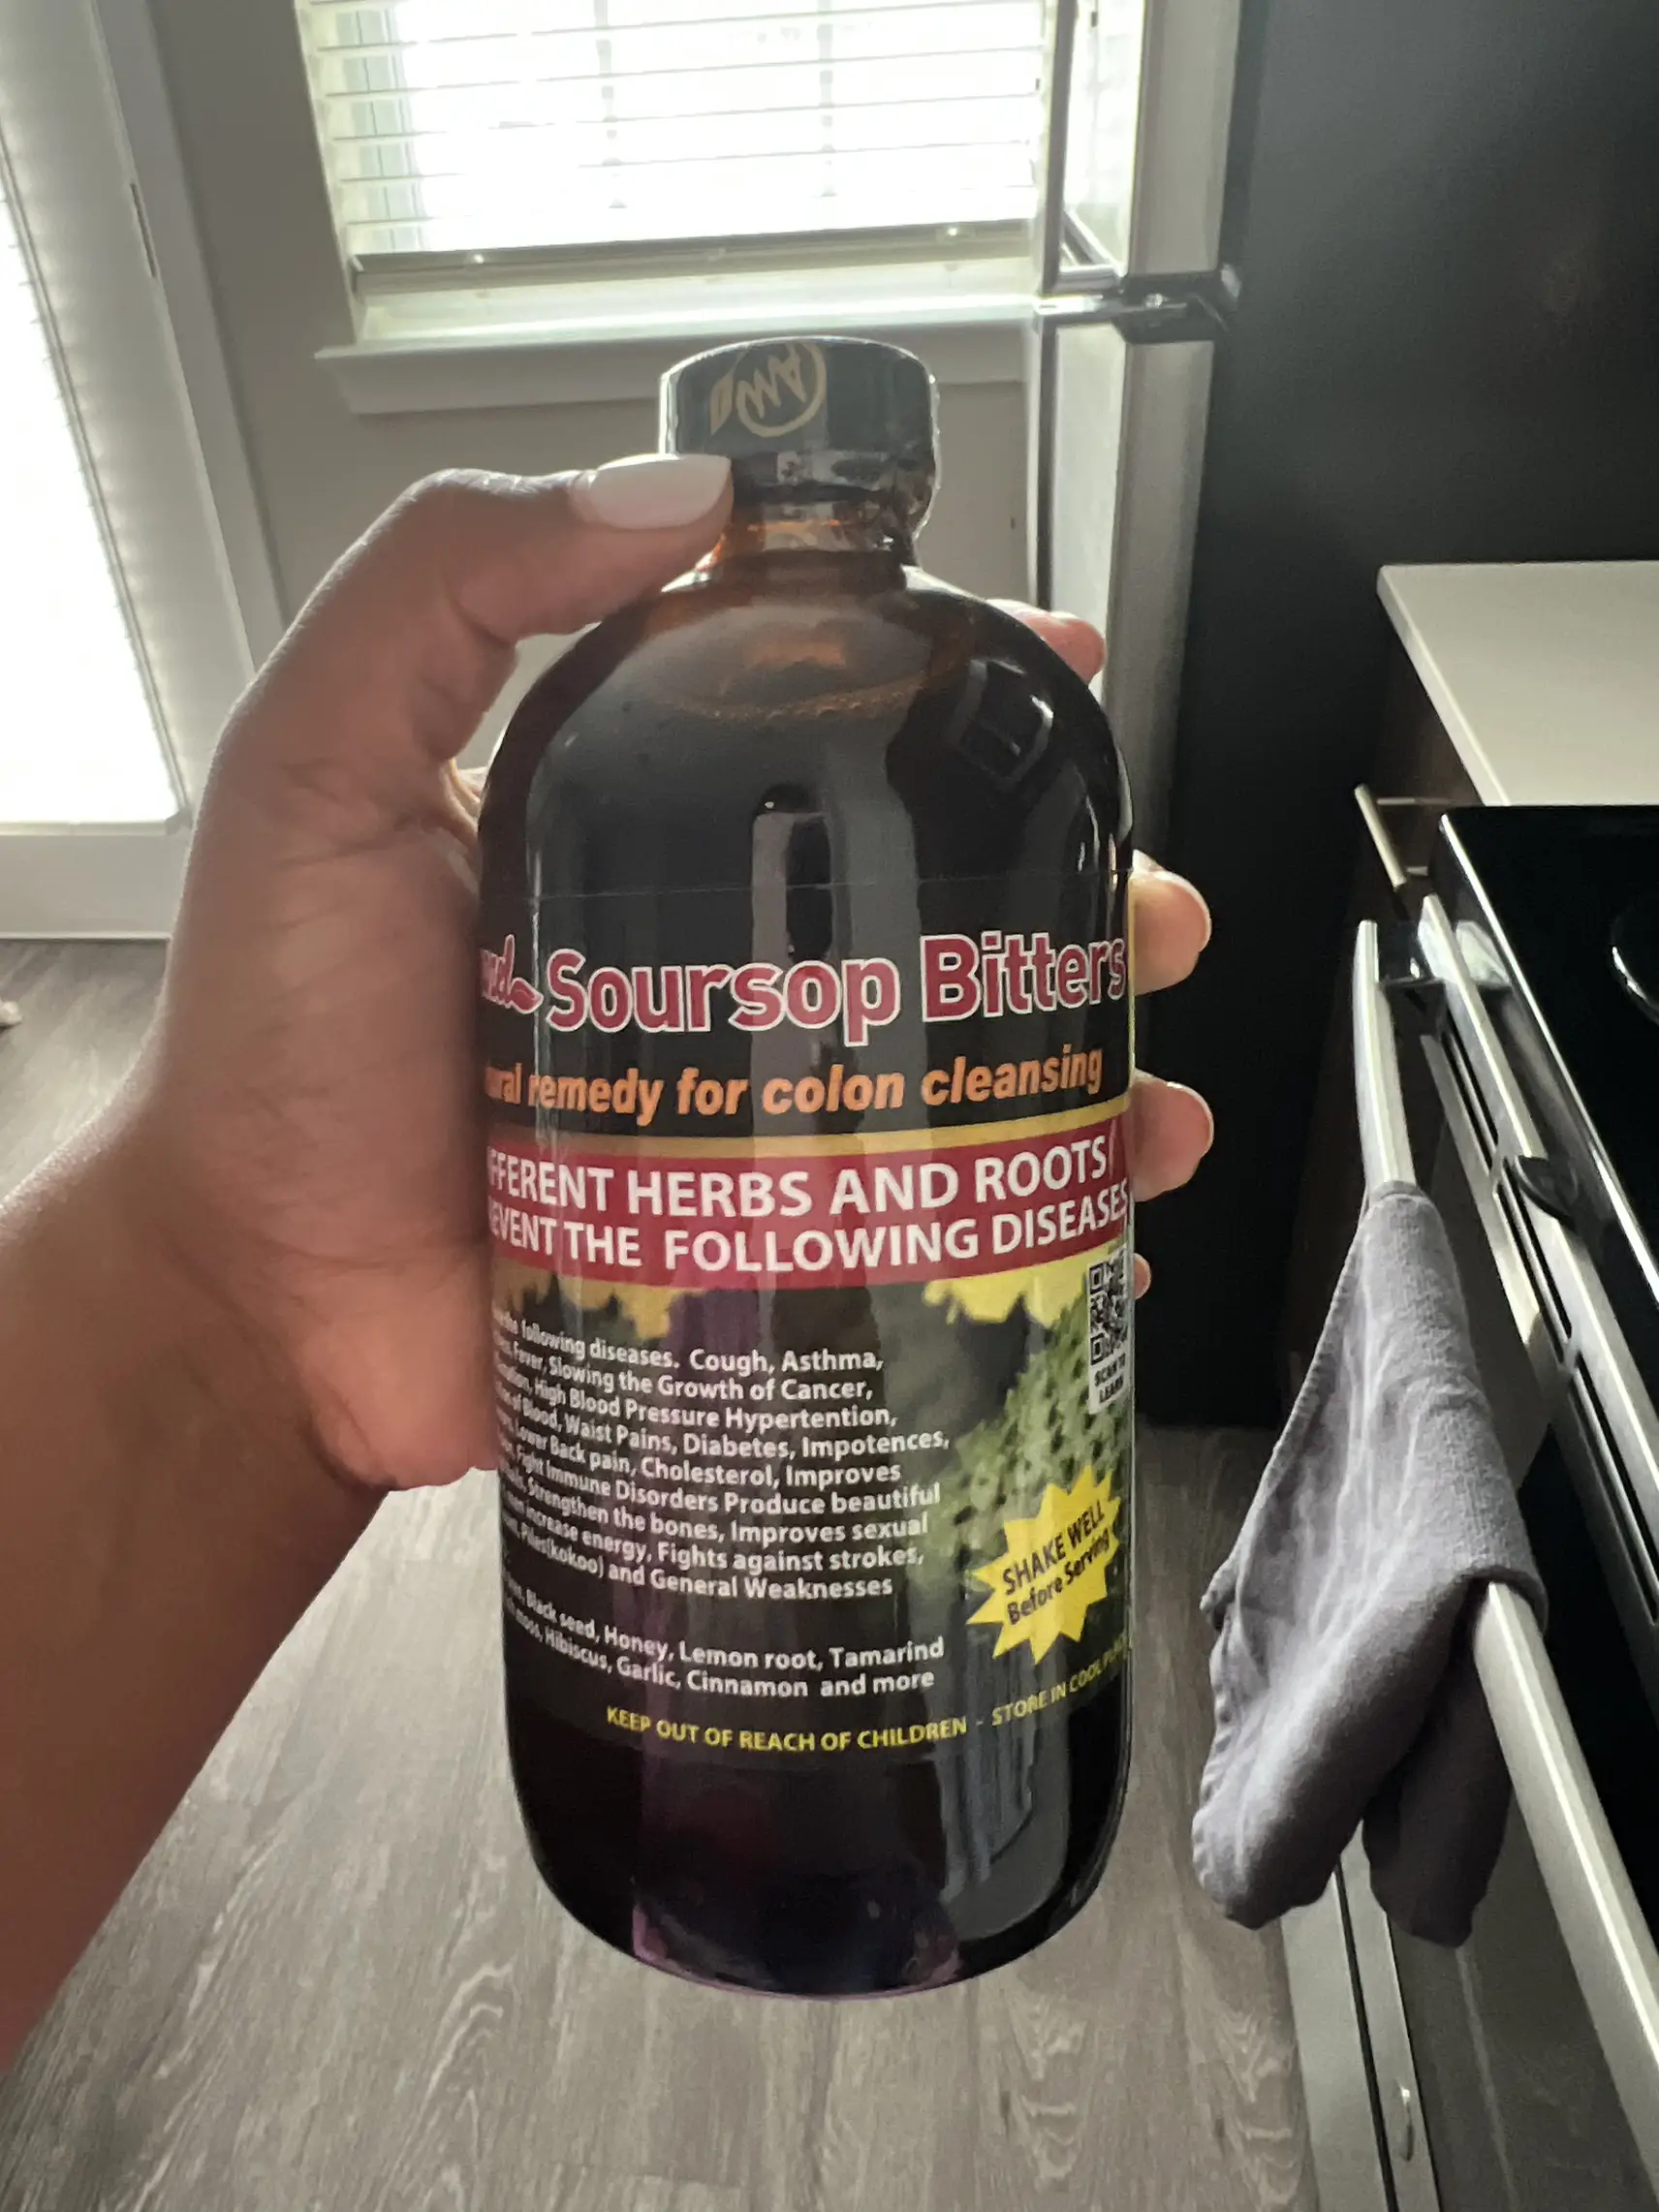  A bottle of 4 Source Blueberry Juice.